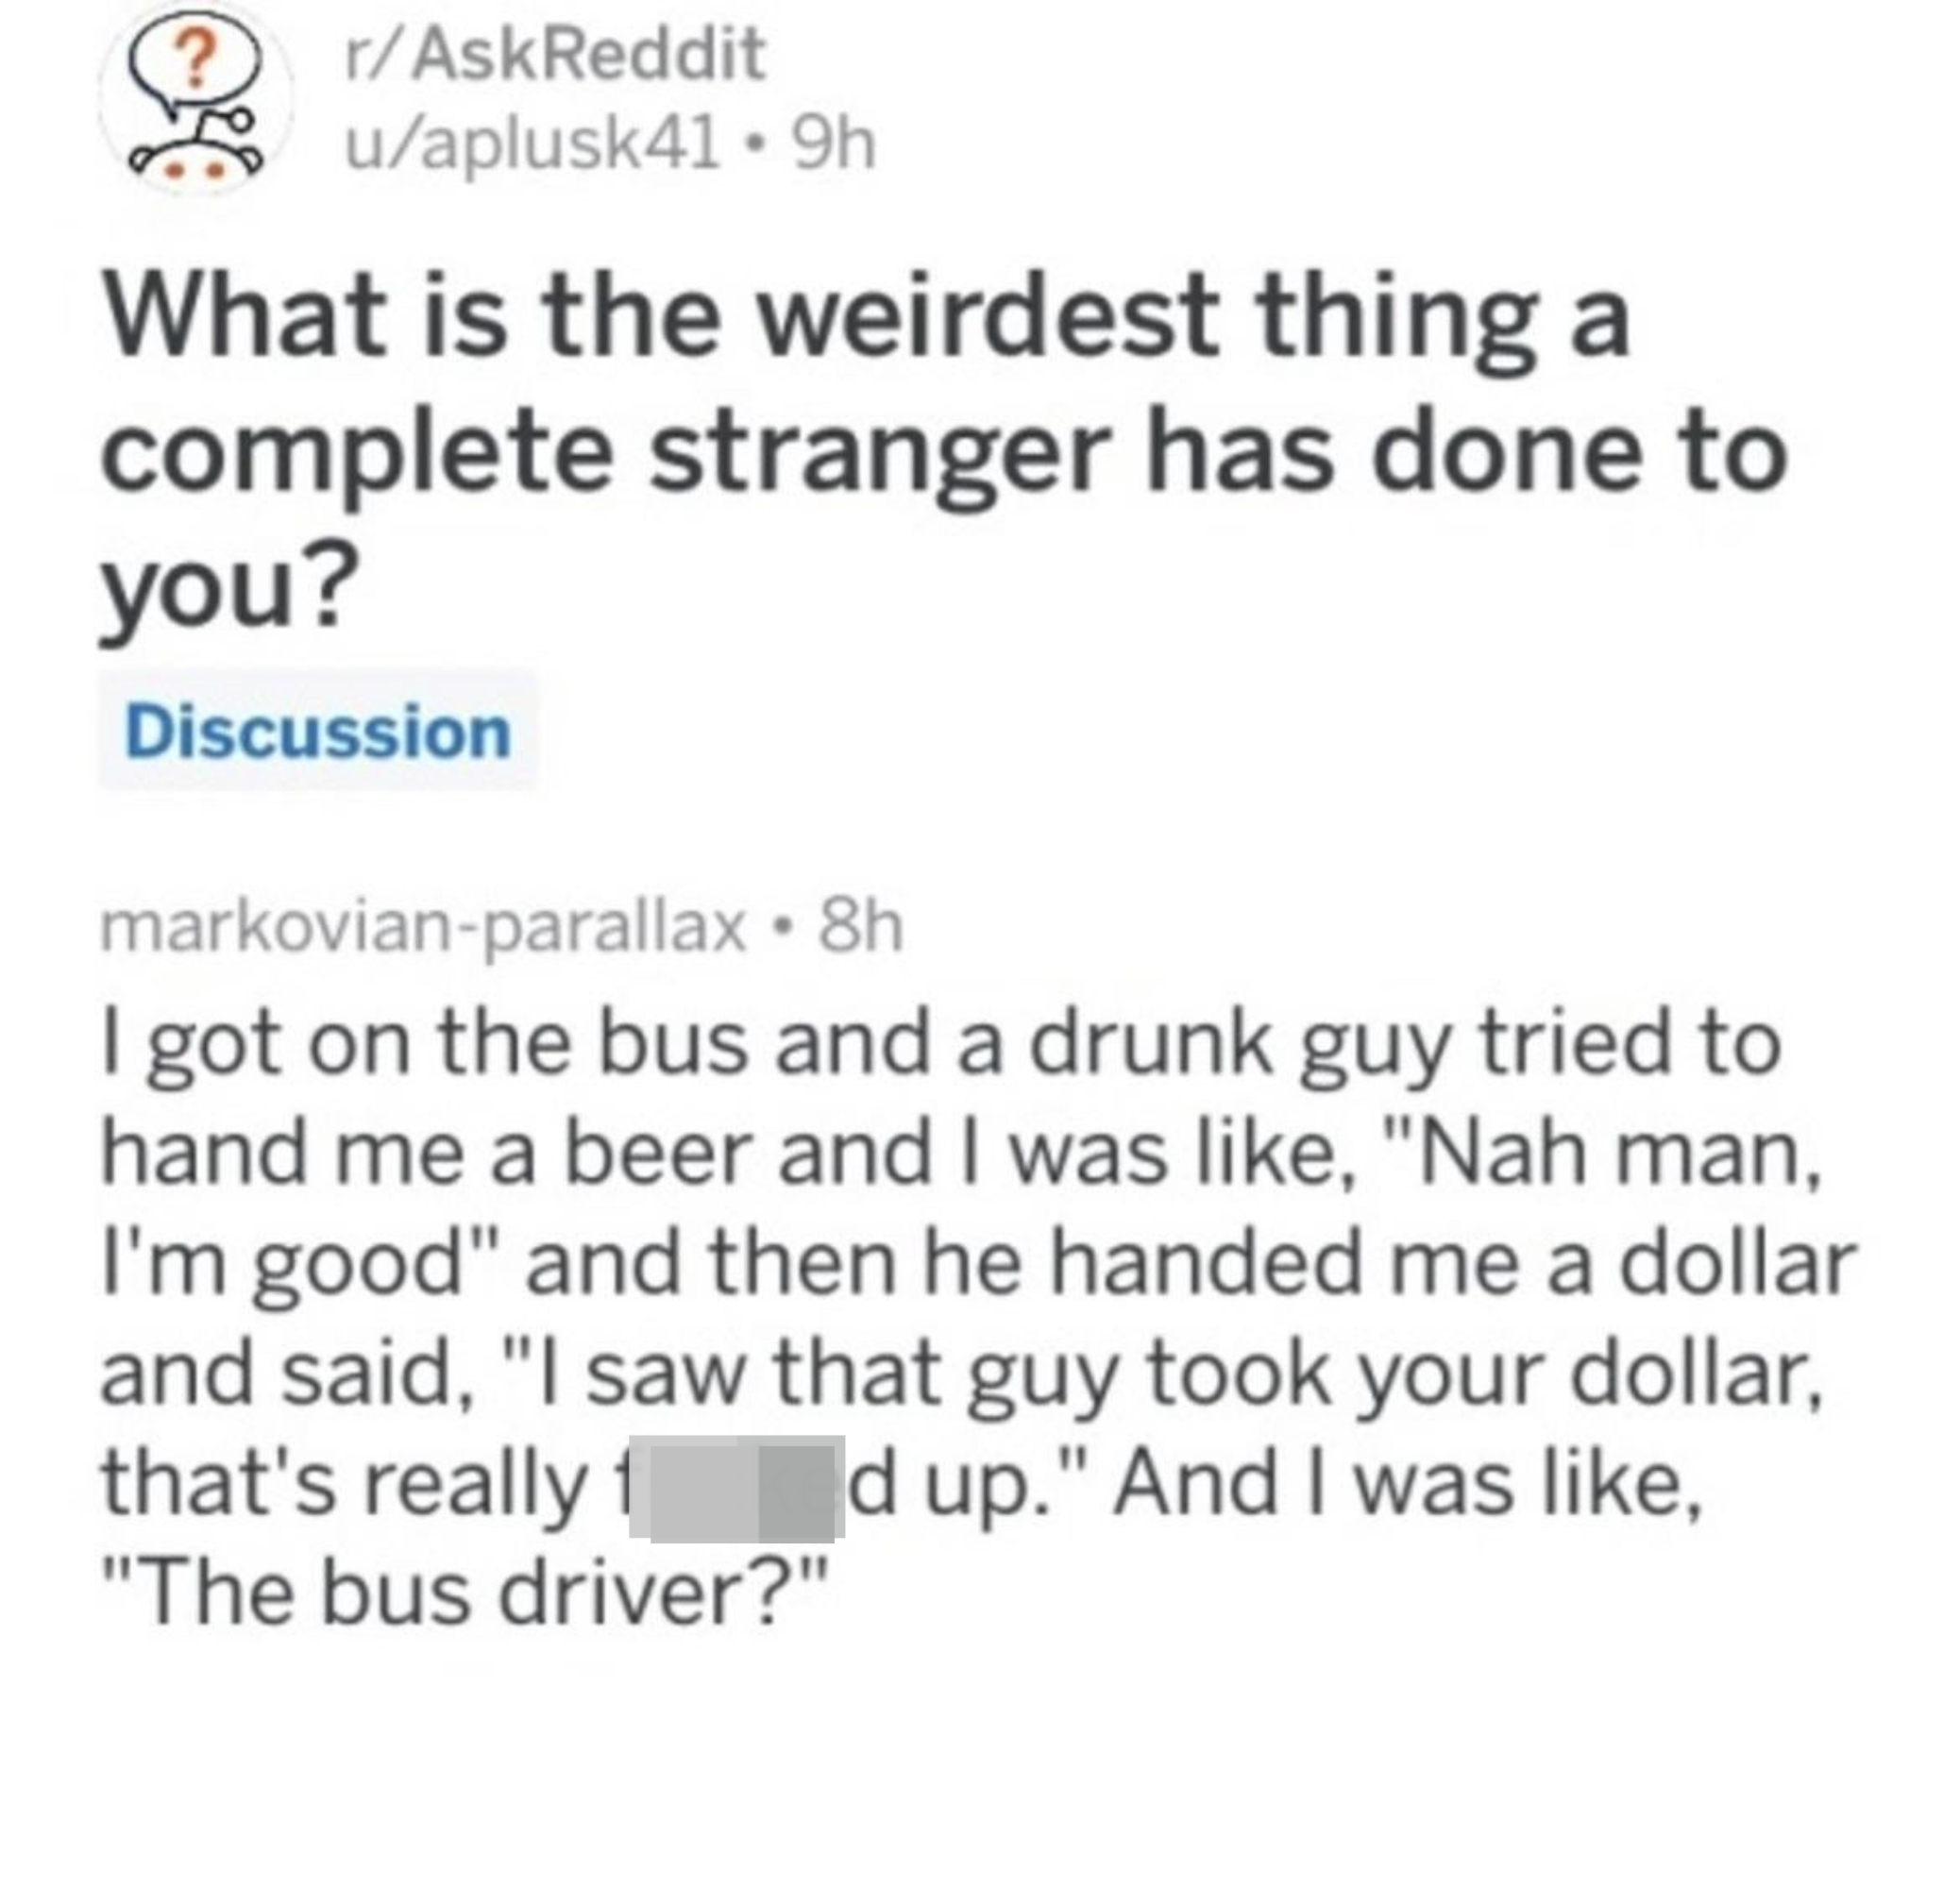 Person got on a bus and a drunk guy tried to hand them a beer; they said &quot;Nah, man, I&#x27;m good,&quot; and then he tried to hand them a dollar and said &quot;I saw that guy took your dollar, that&#x27;s really f*&amp;amp;ked up,&quot; and the person was like, &quot;The bus driver?&quot;